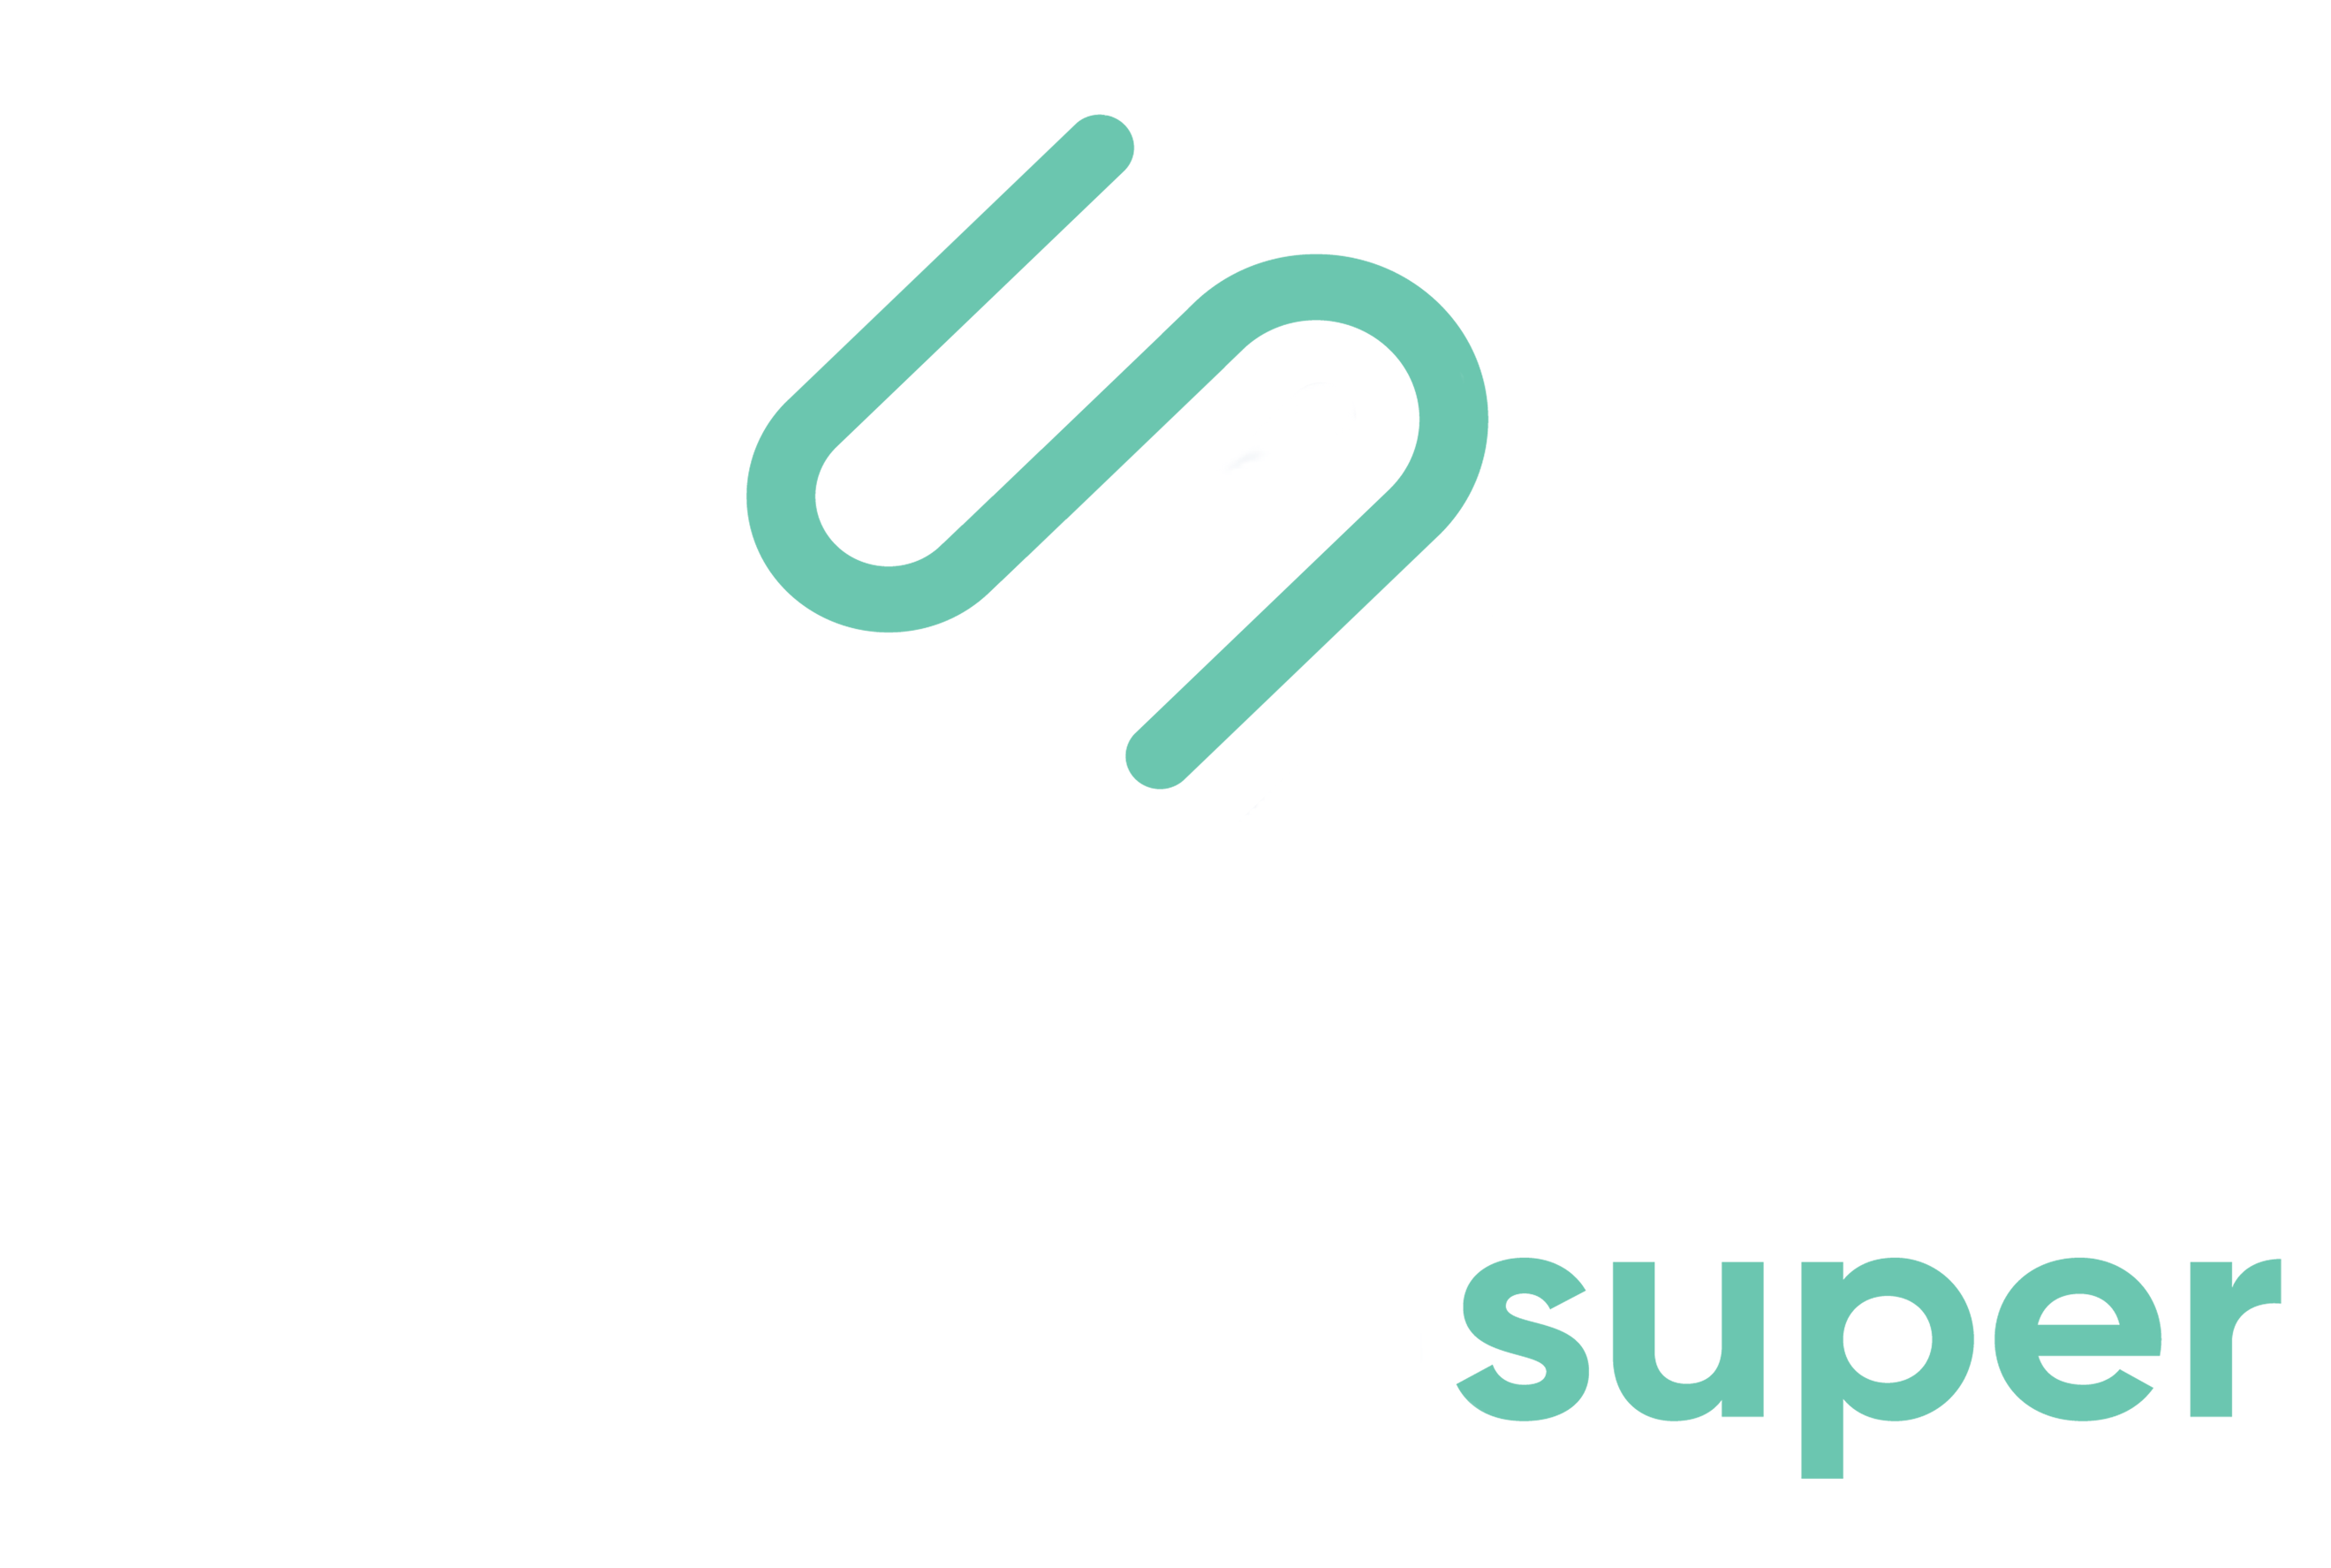 Engaged Super is a Brisbane based specialist SMSF Audit firm